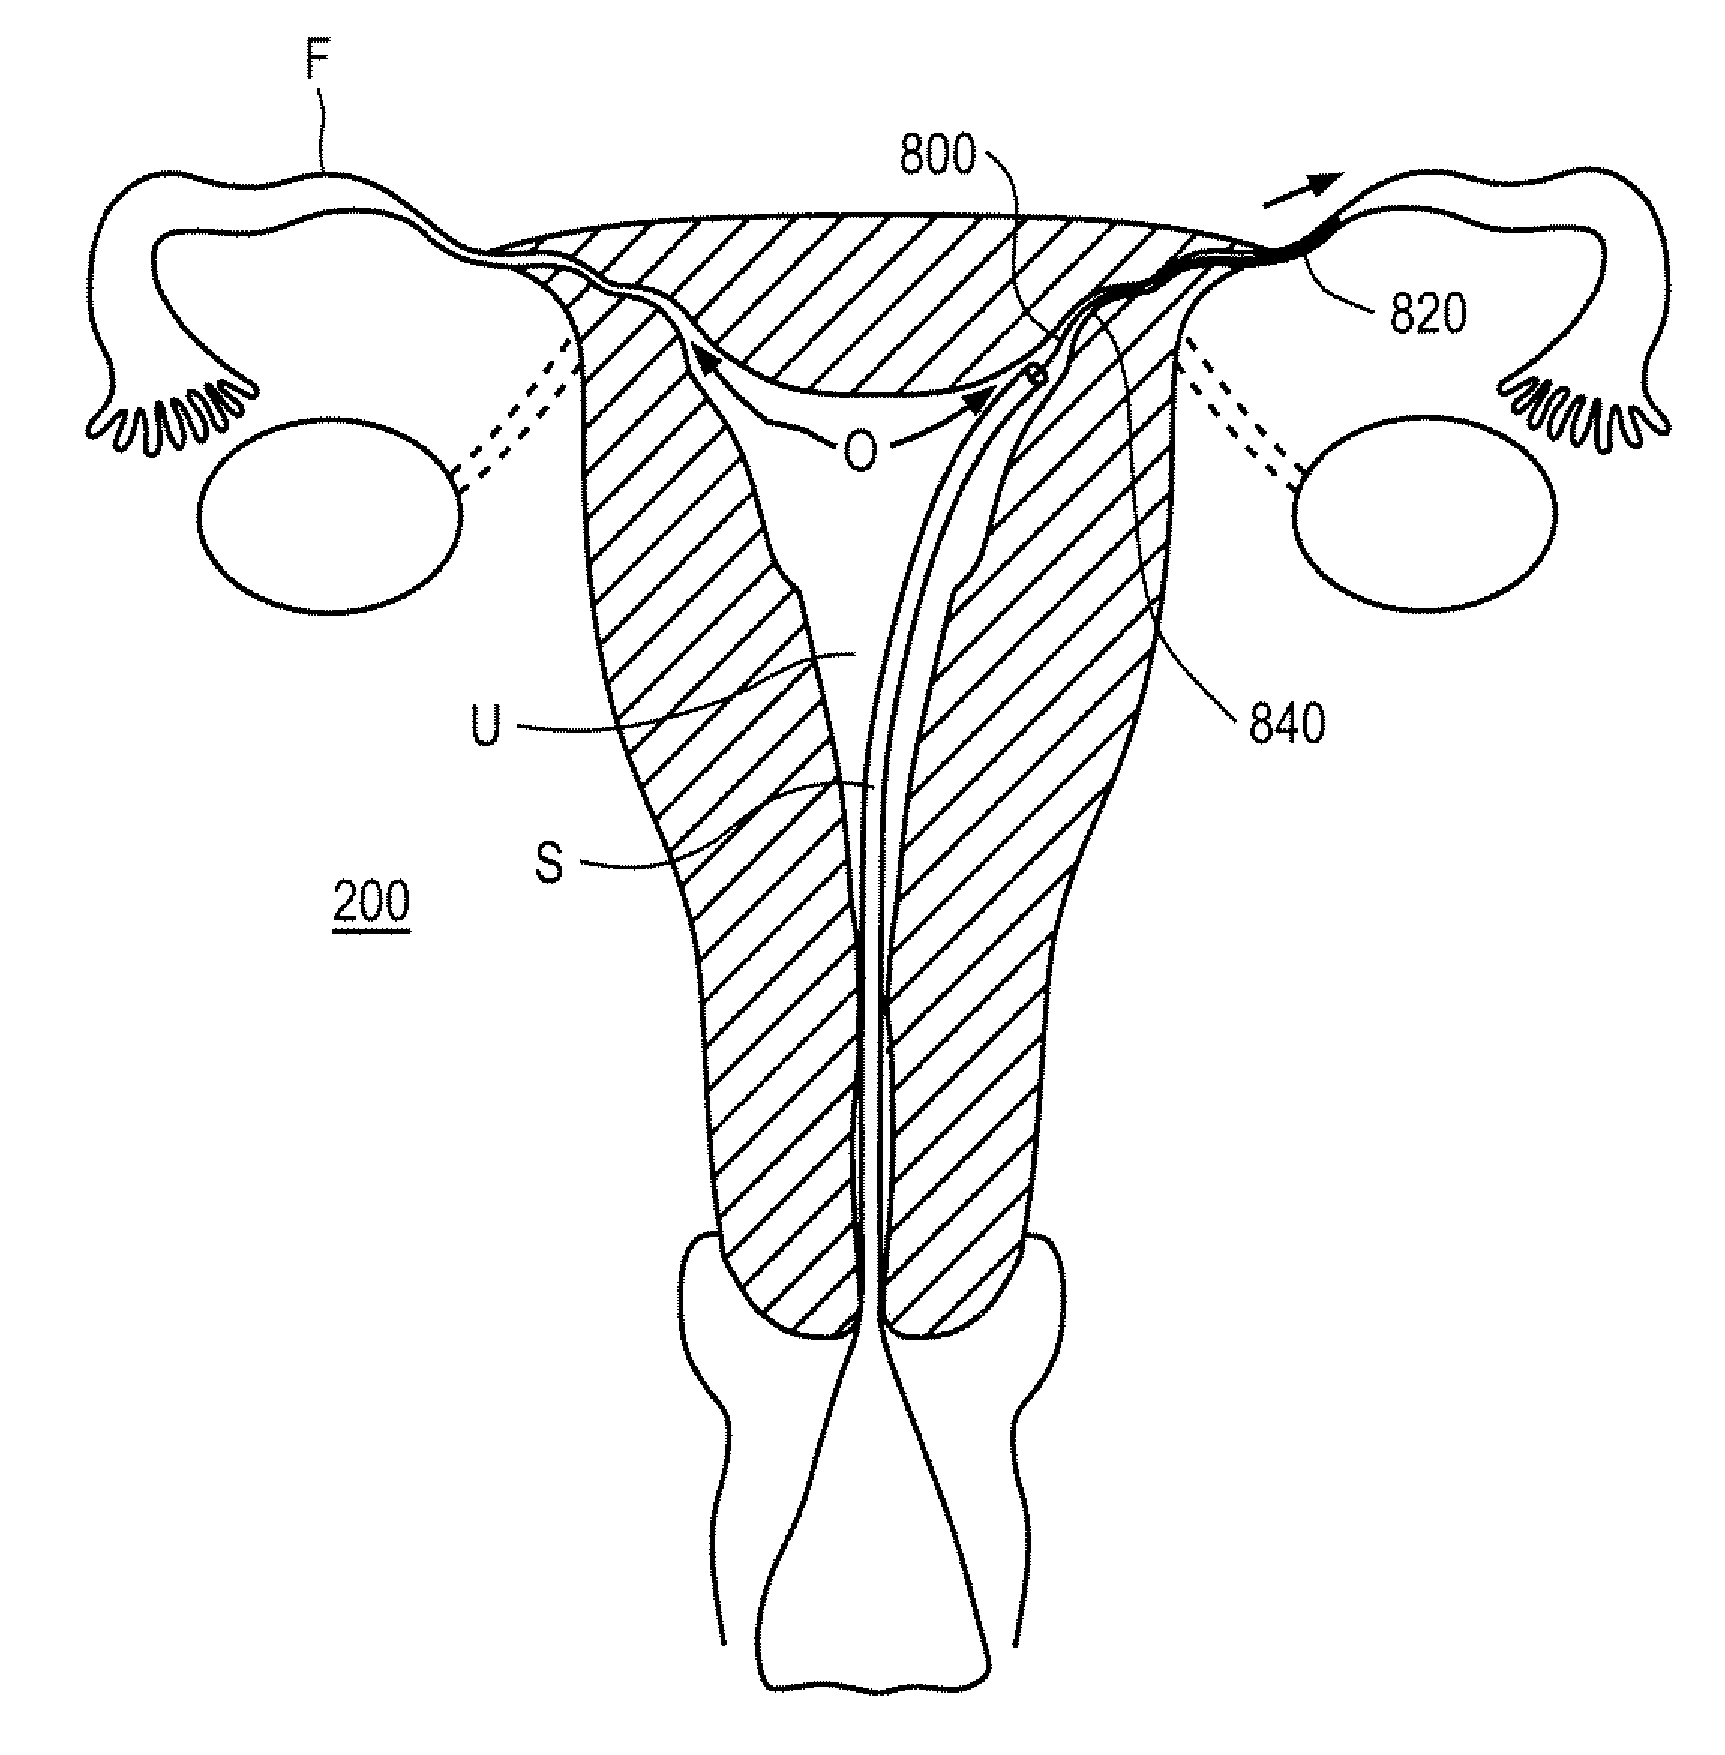 Minimally invasive delivery devices and methods